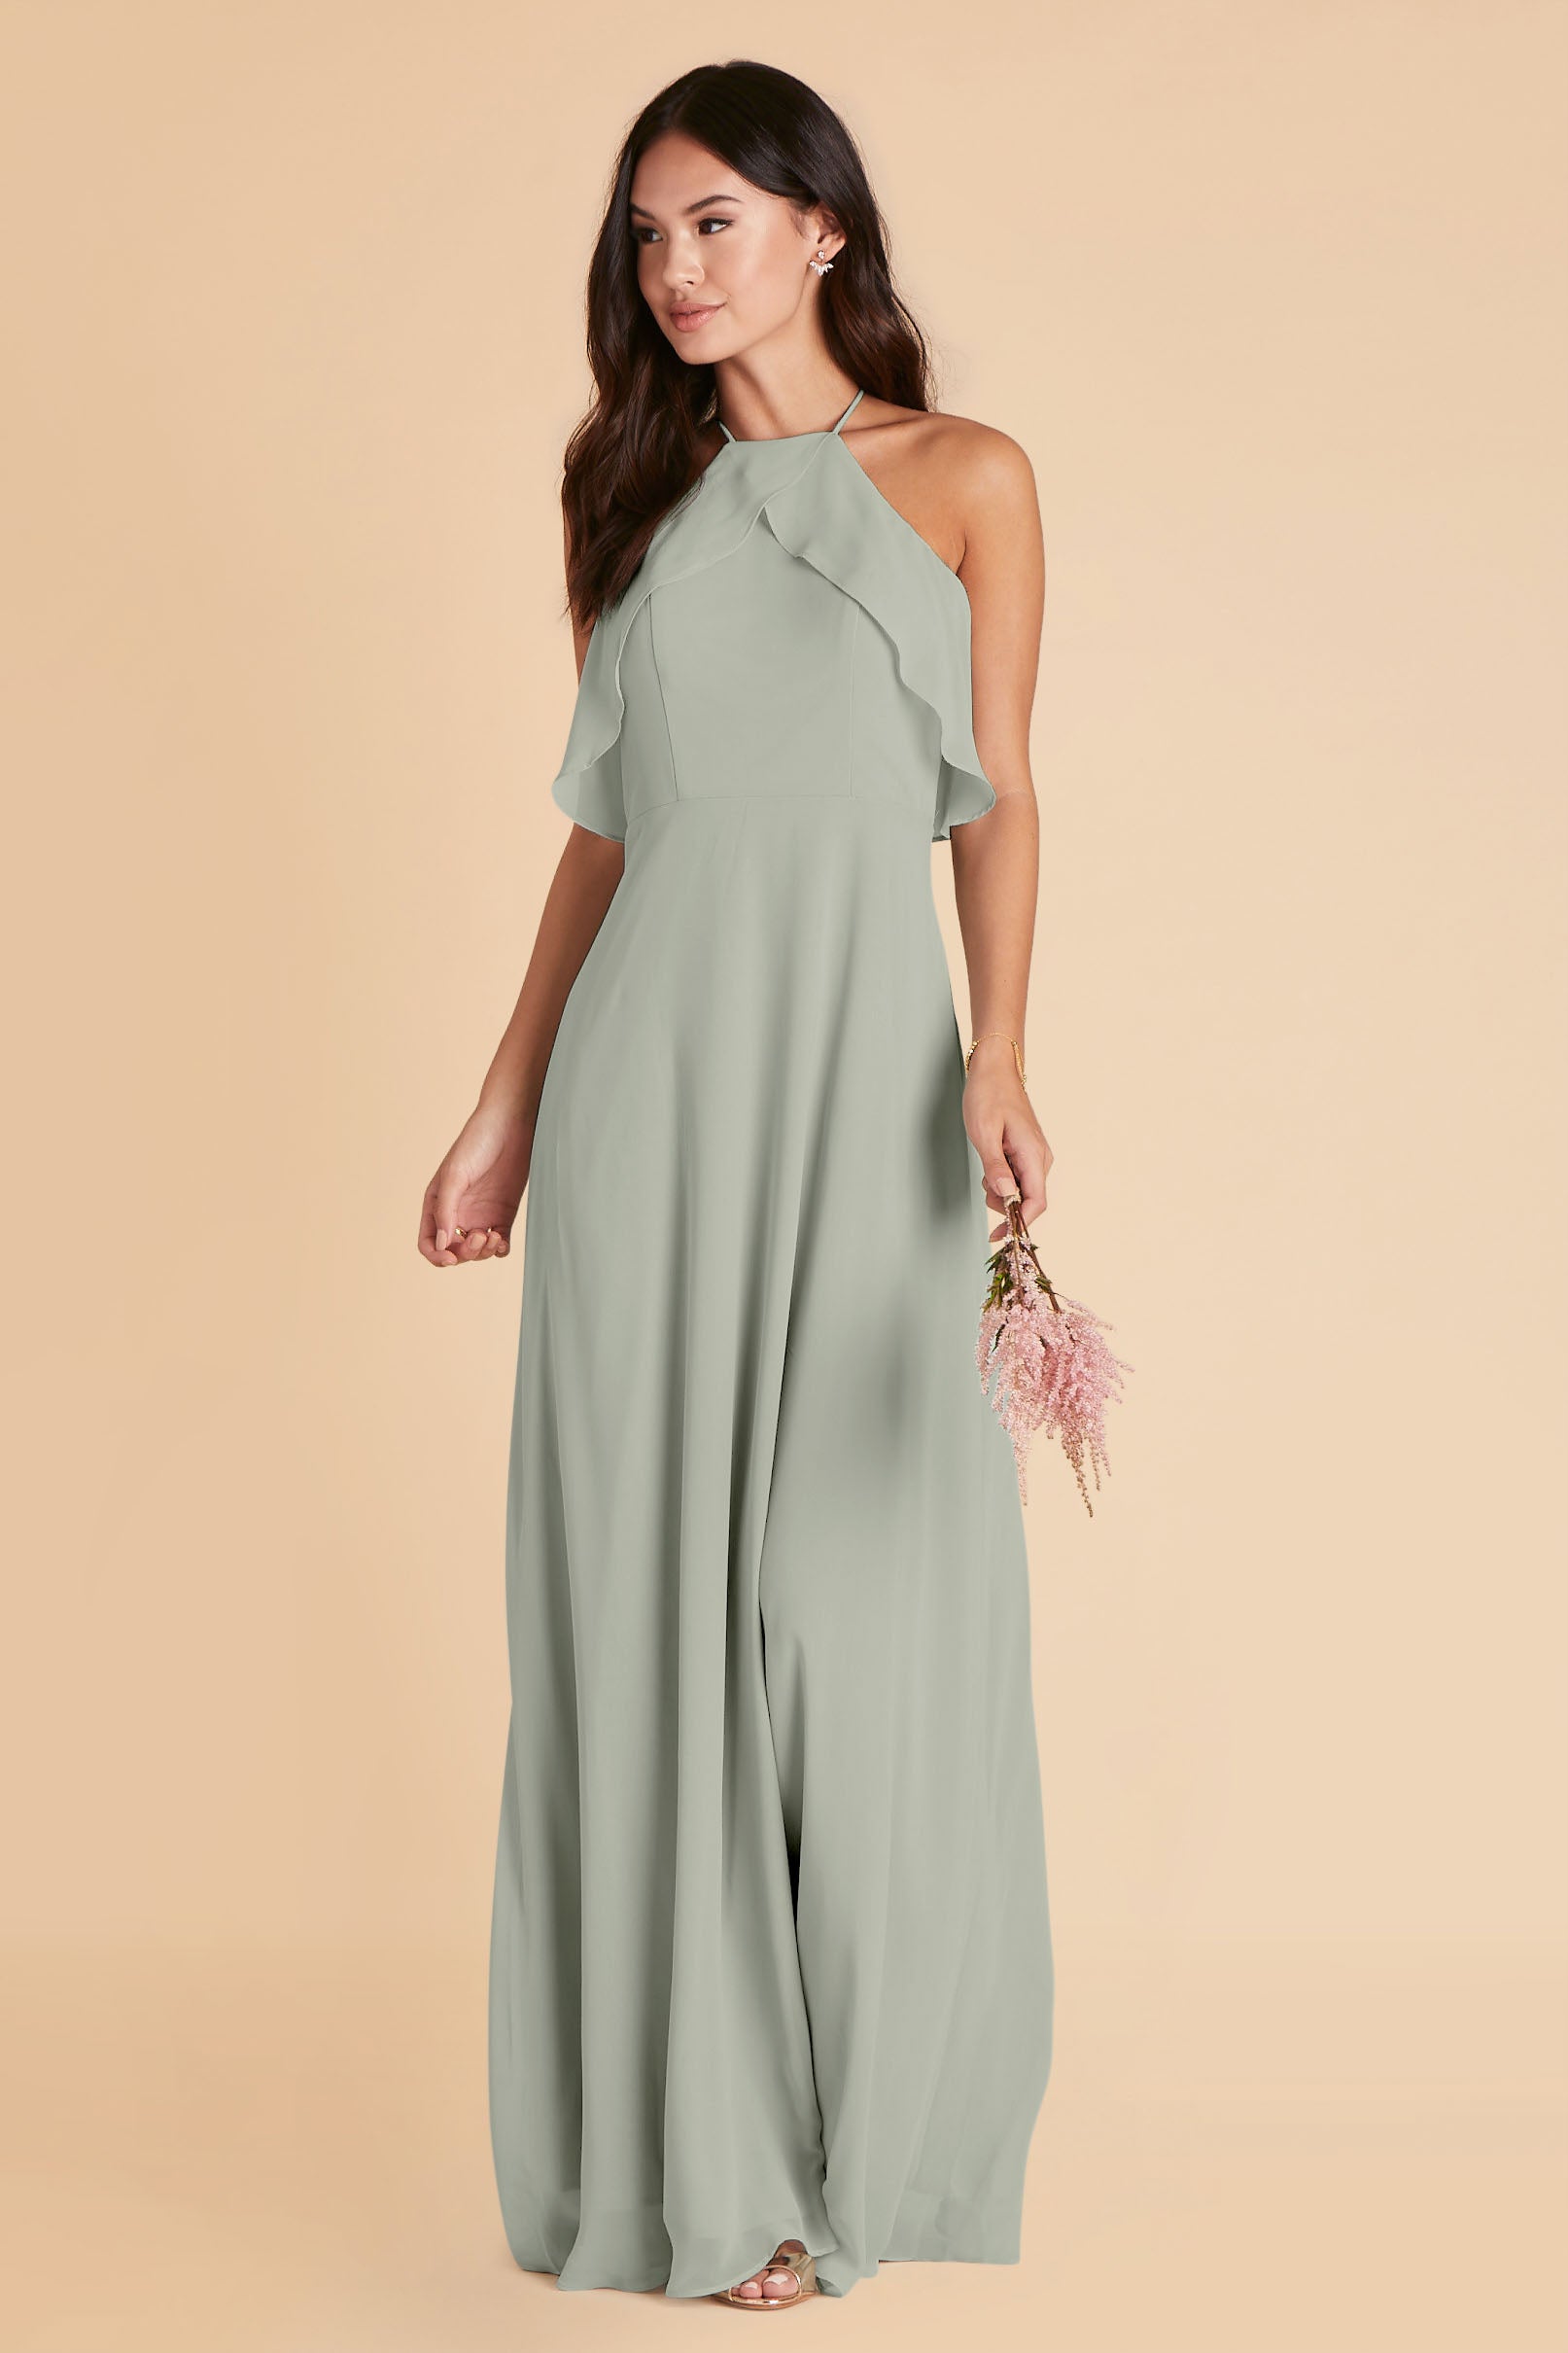 Jules bridesmaid dress in sage green chiffon by Birdy Grey, front view